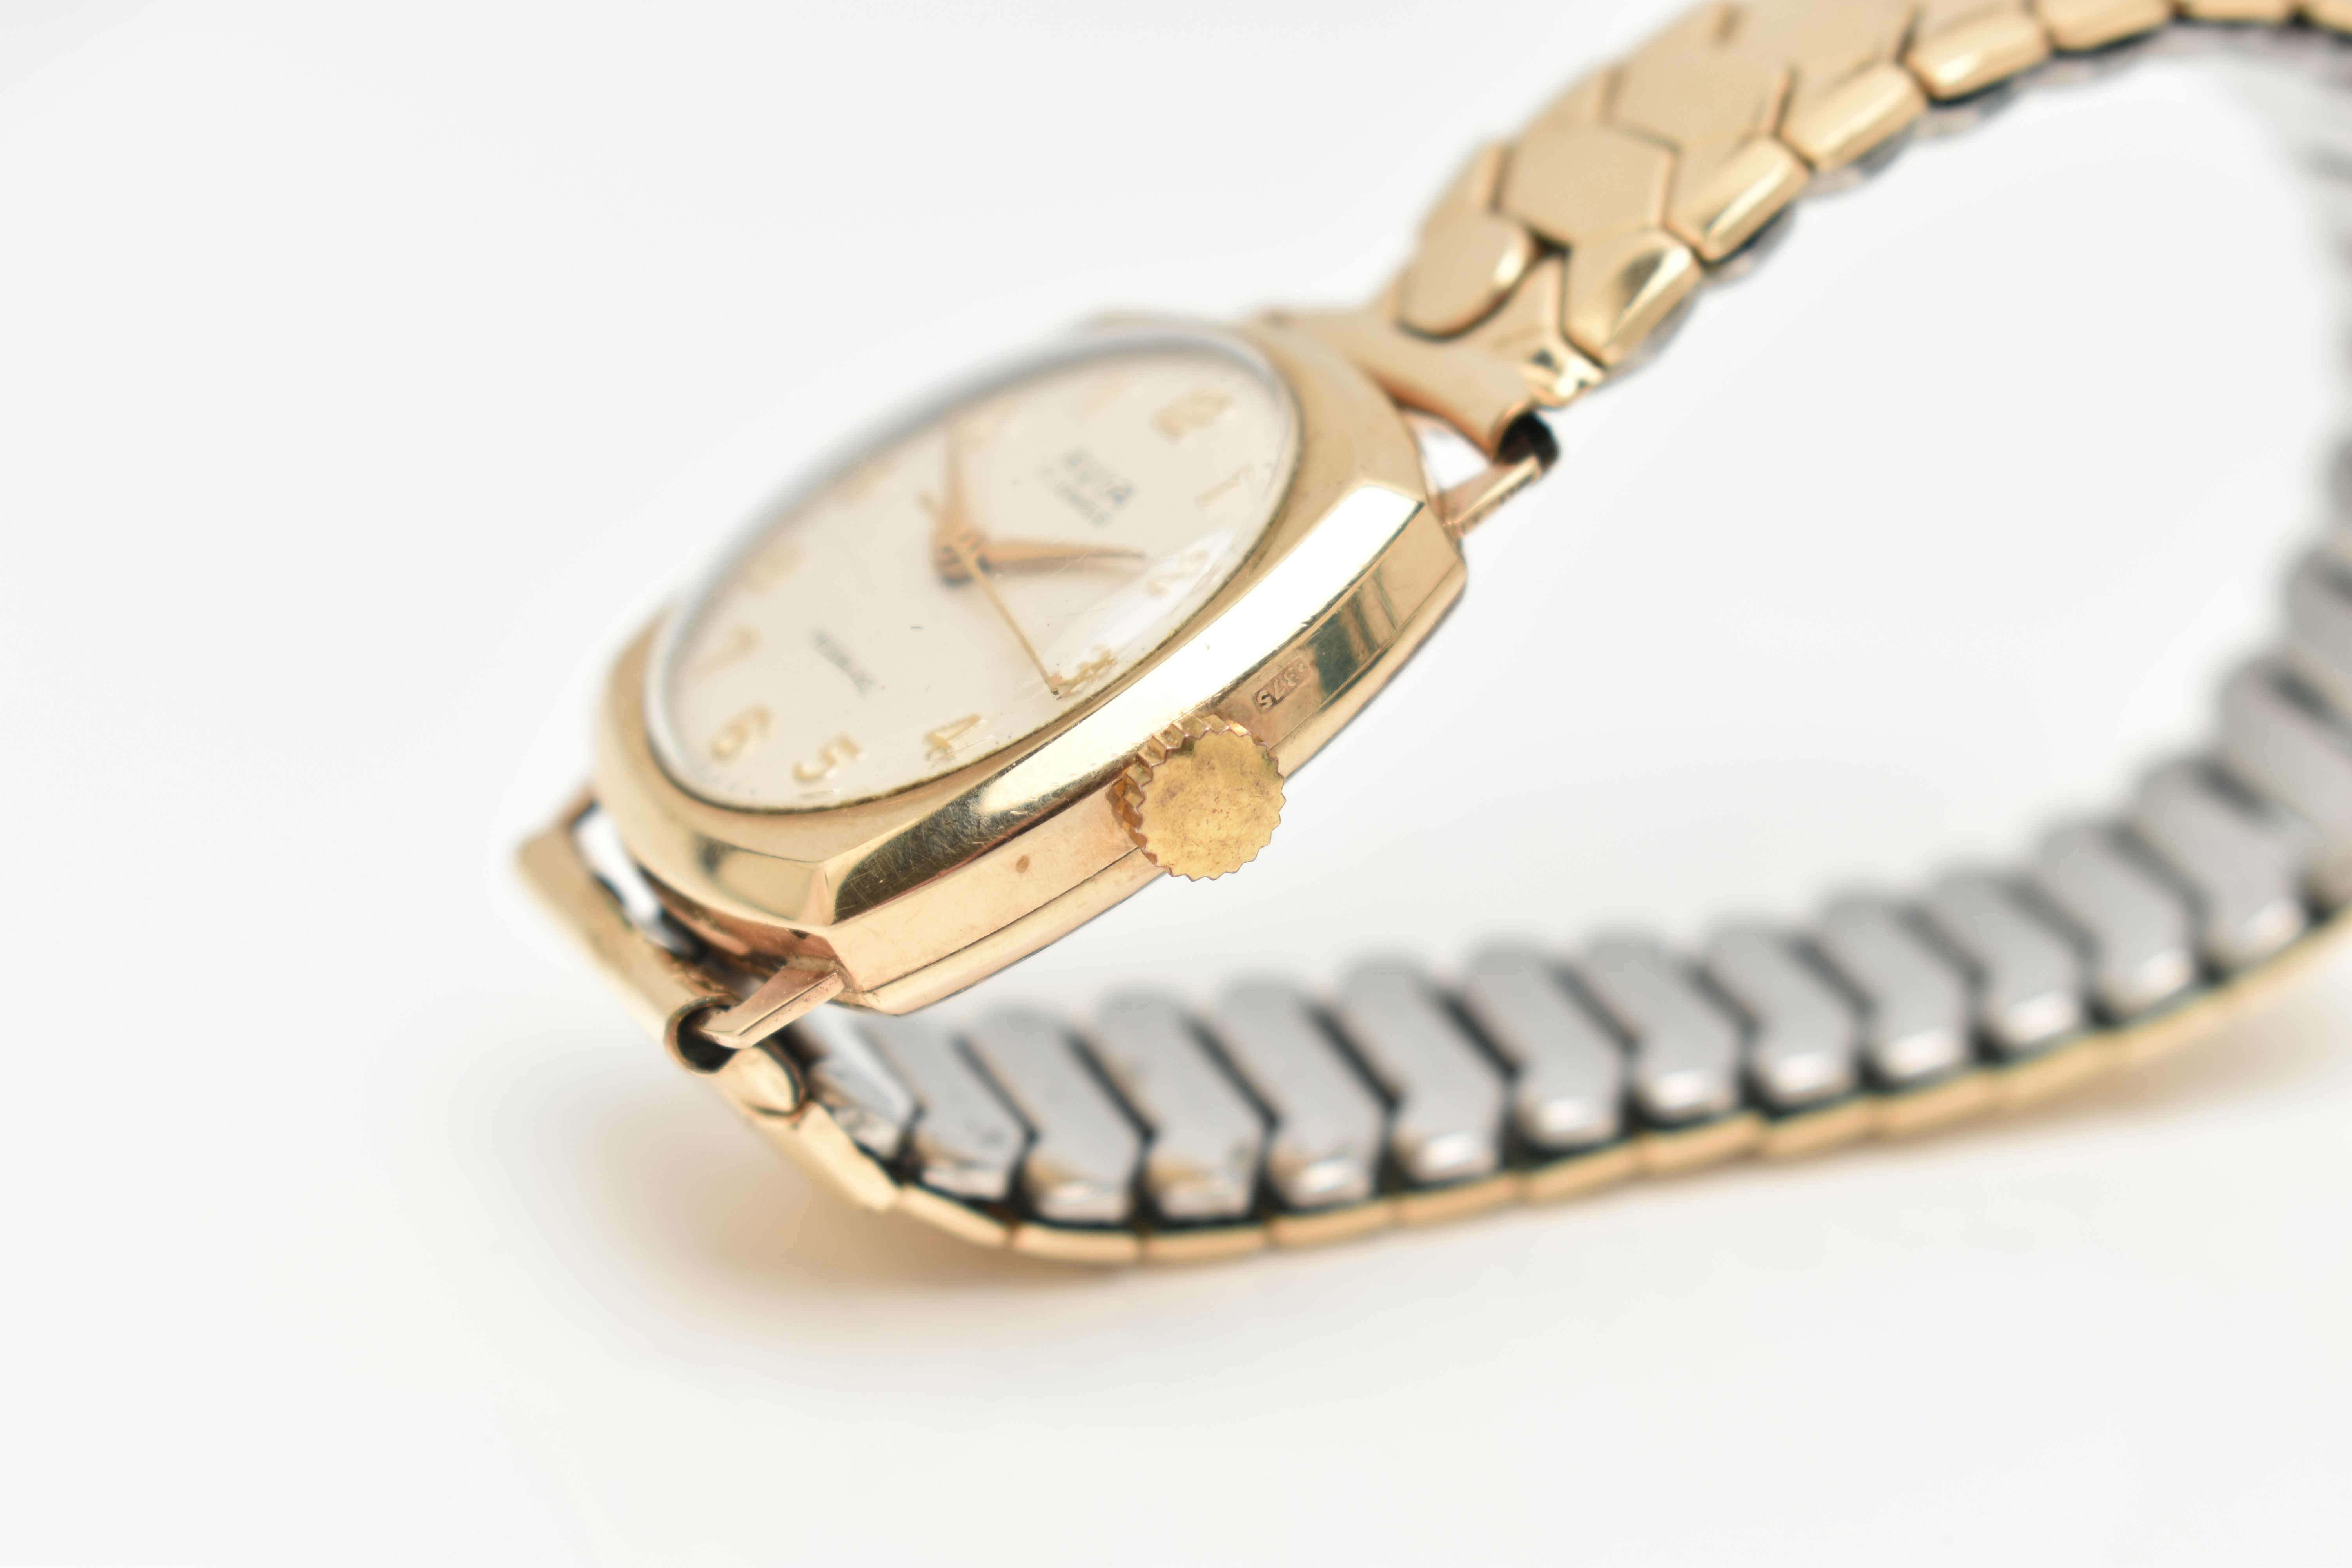 A 9CT GOLD 'AVIA' WRISTWATCH, manual wind, round silver dial signed 'Avia 17 Jewels, Incabloc', - Image 6 of 6